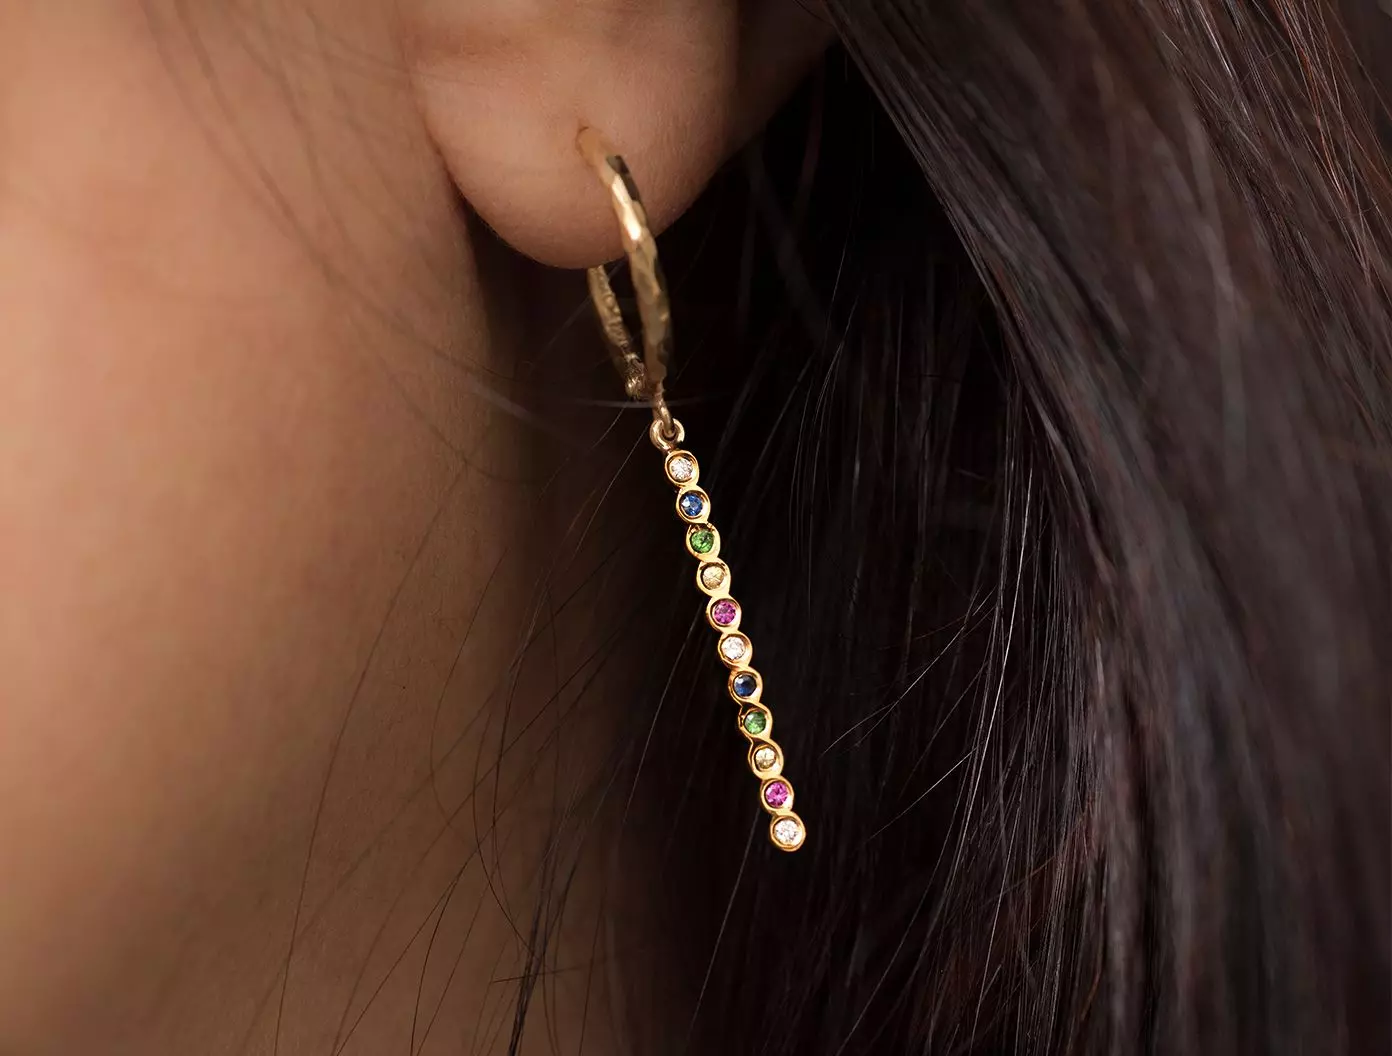 14k Gold Gypsy Earrings with Sapphires